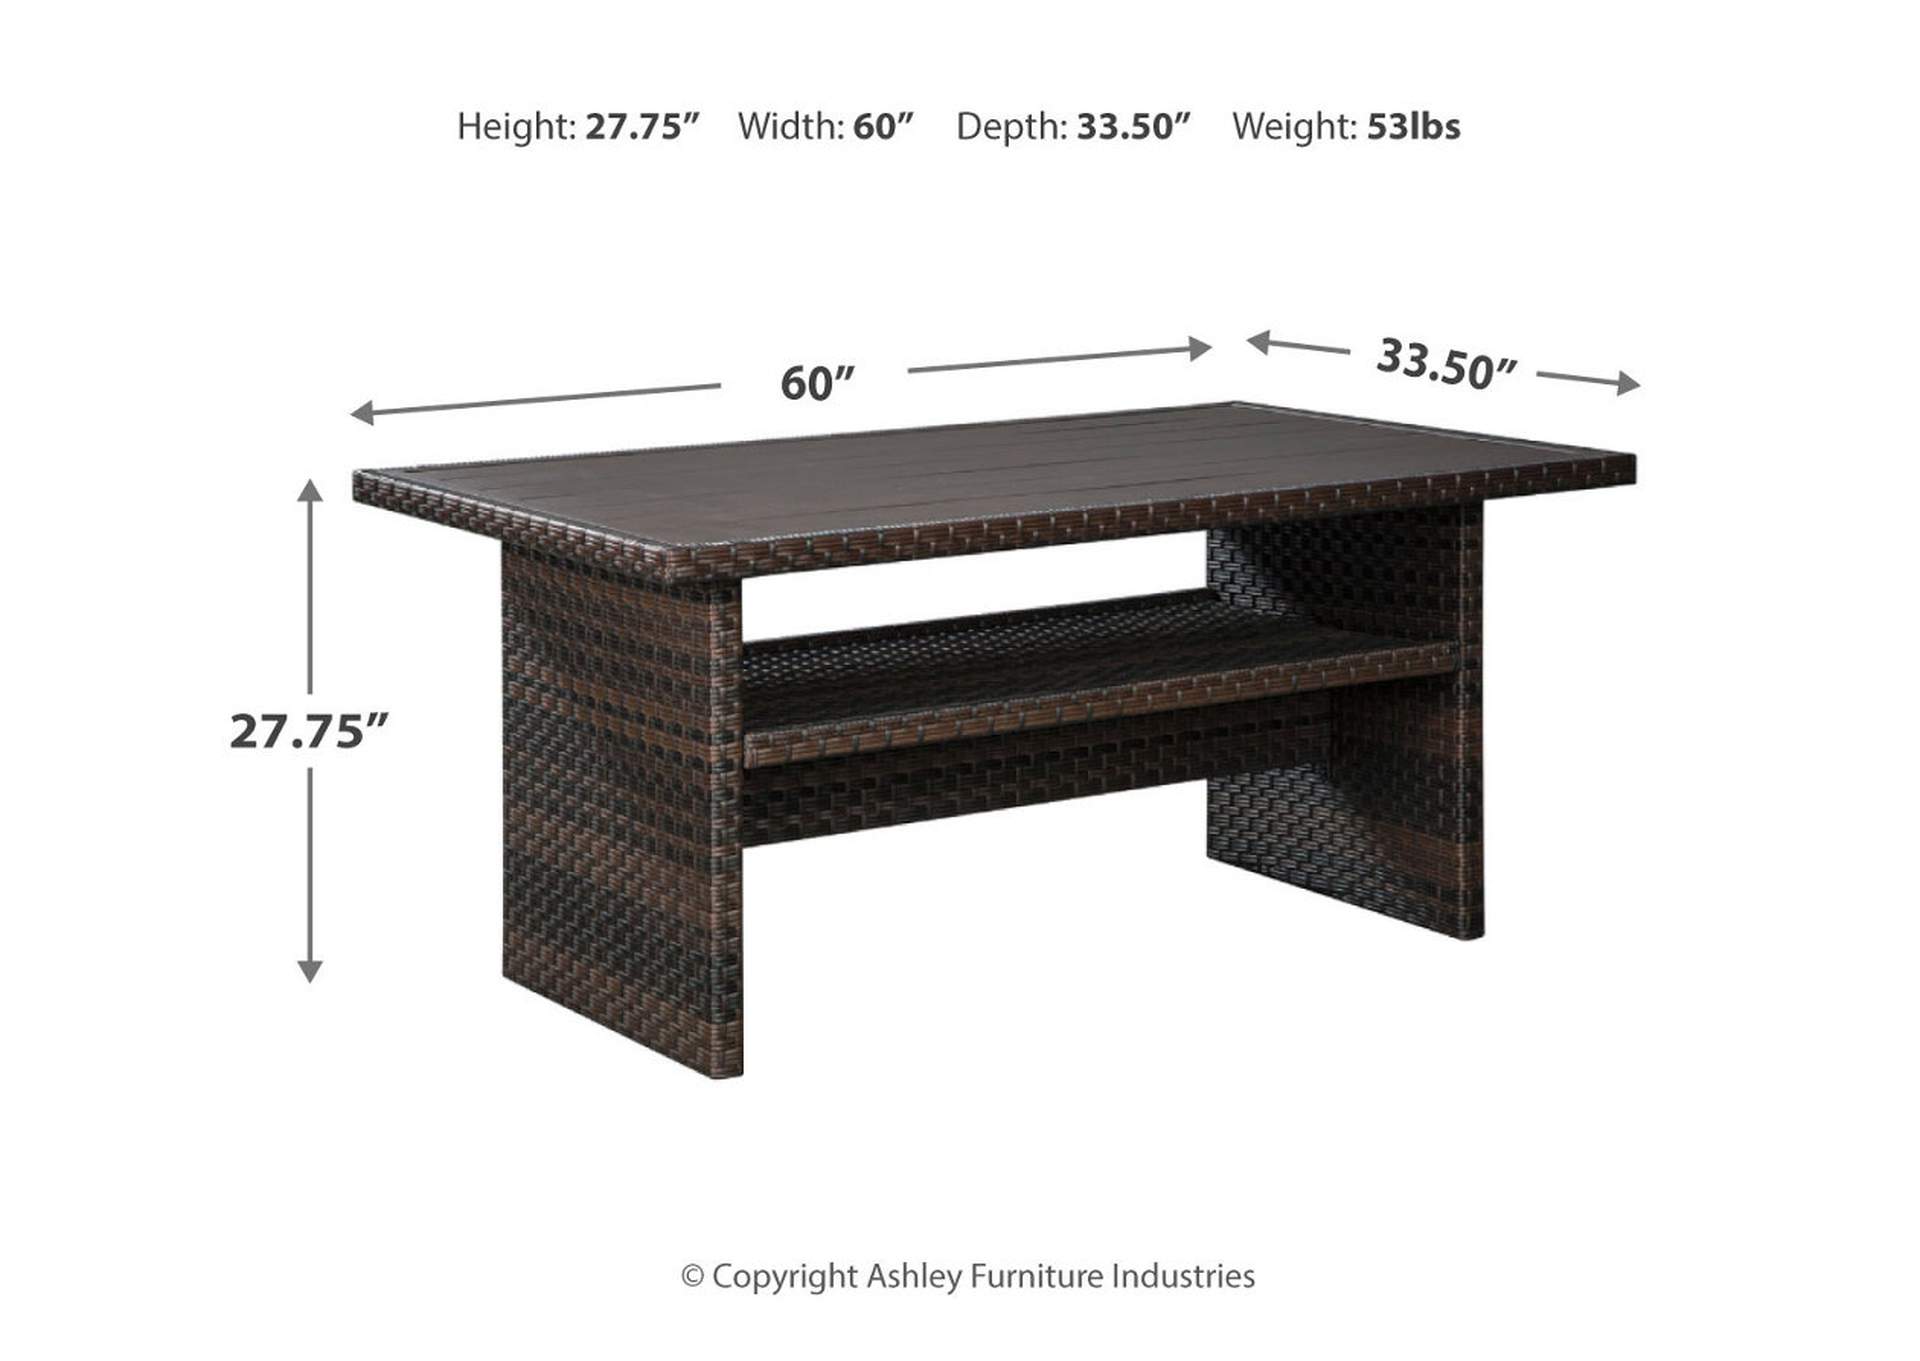 Easy Isle Multi-Use Table,Outdoor By Ashley